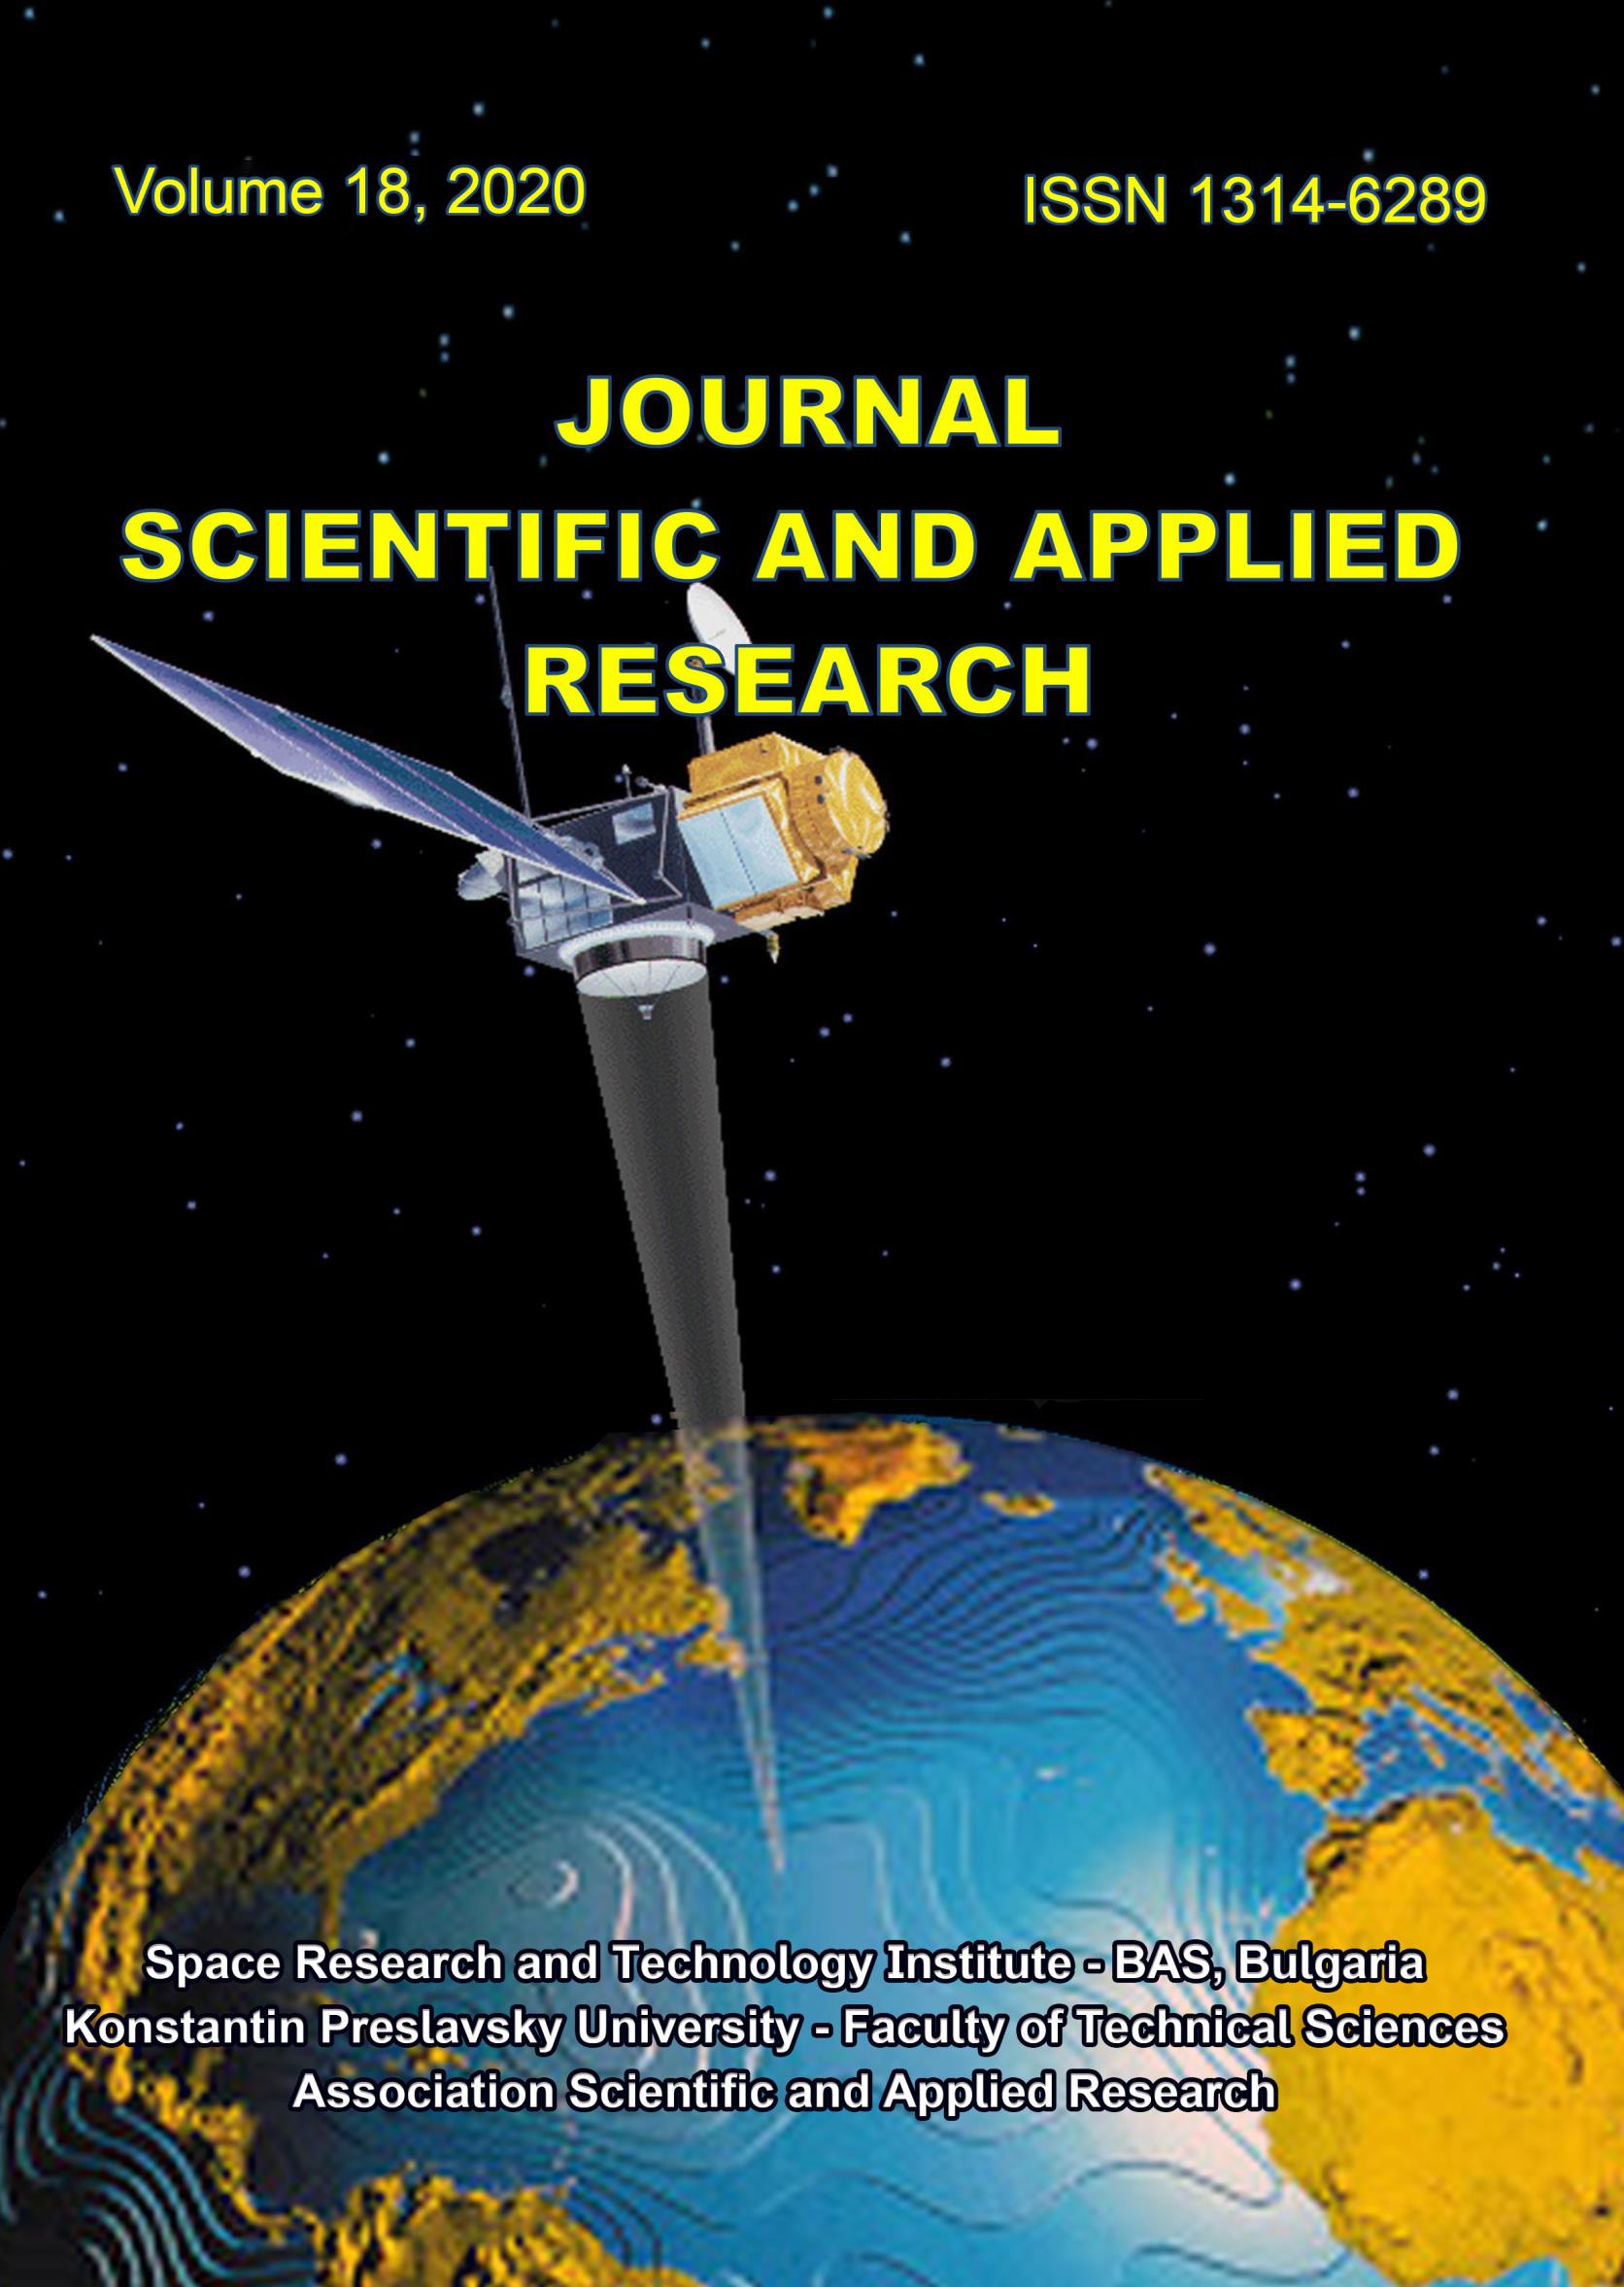 					View Vol. 18 No. 1 (2020): Journal Scientific and Applied Research
				